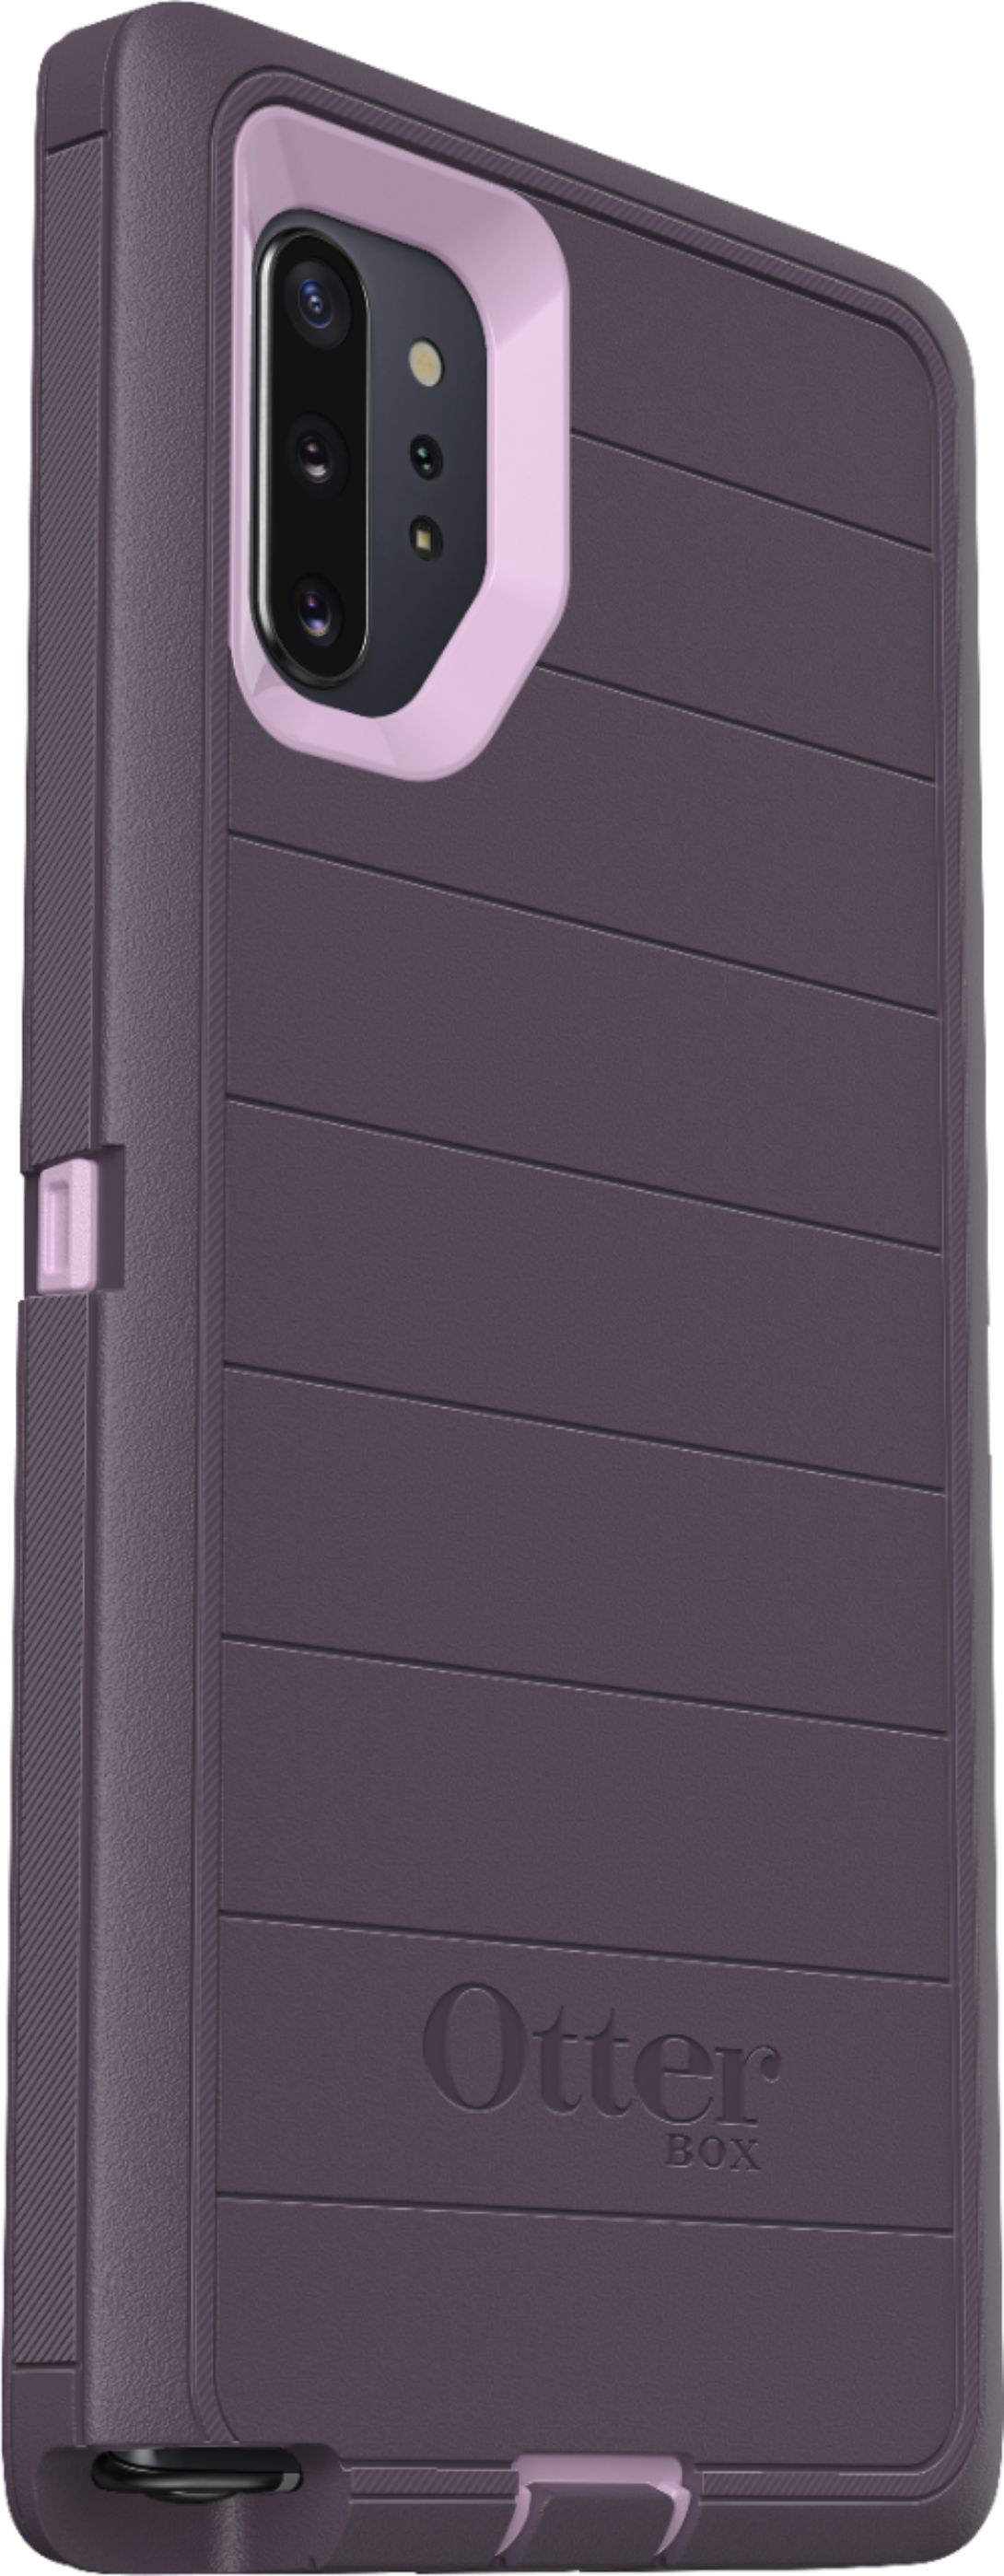 Angle View: OtterBox - Defender Series Pro Case for Samsung Galaxy Note10+ and Note10+ 5G - Purple Nebula